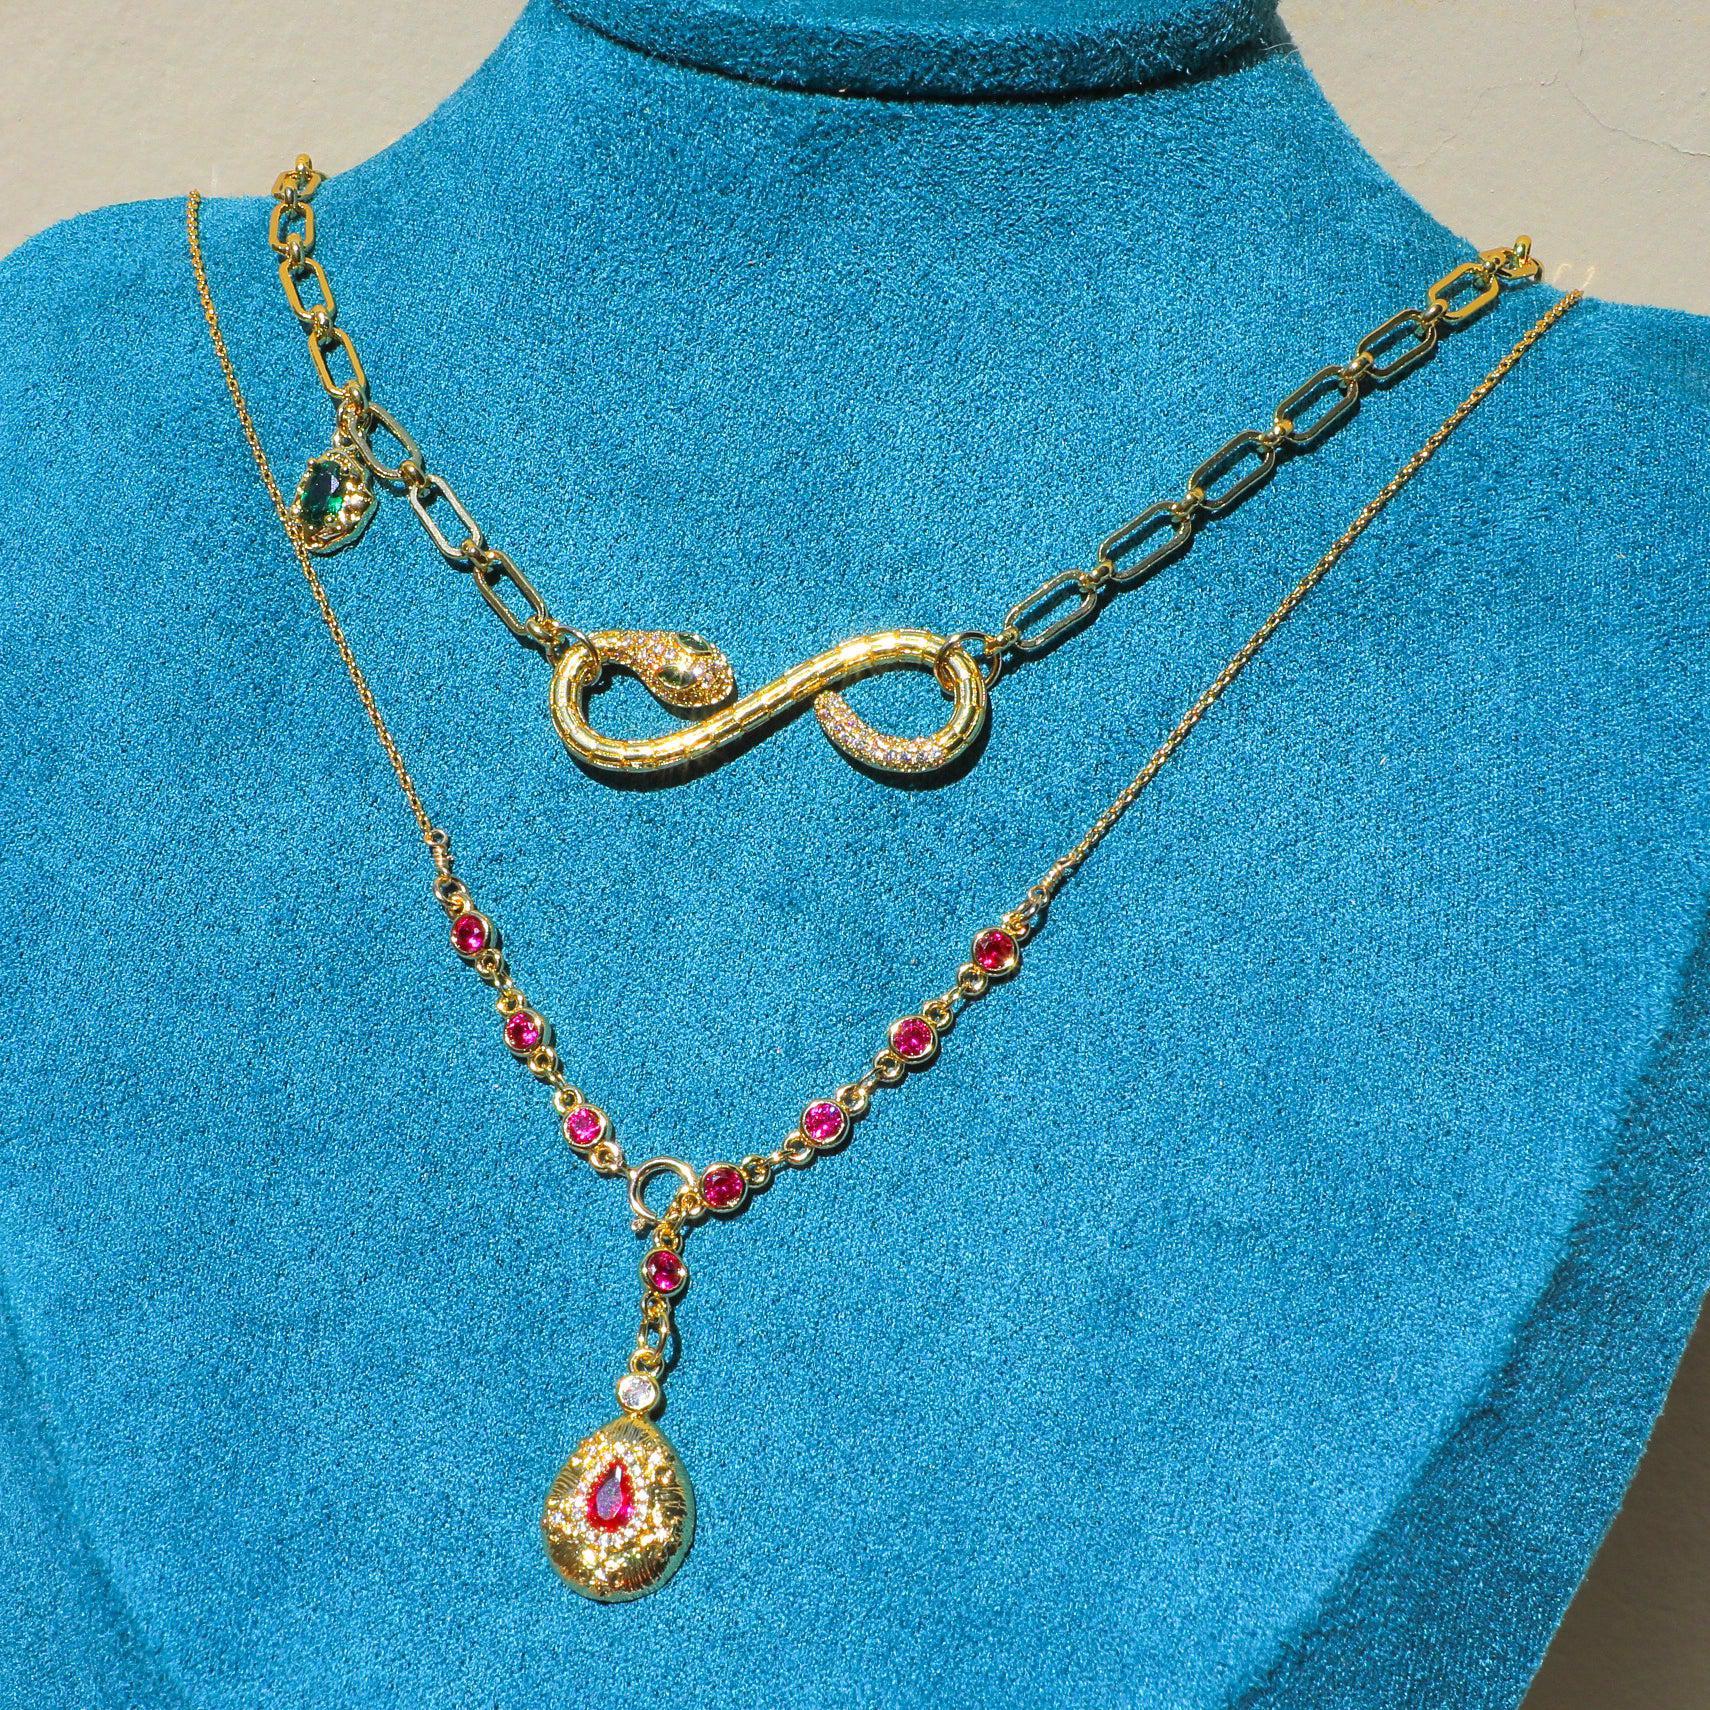 Serpent's Lure Necklace